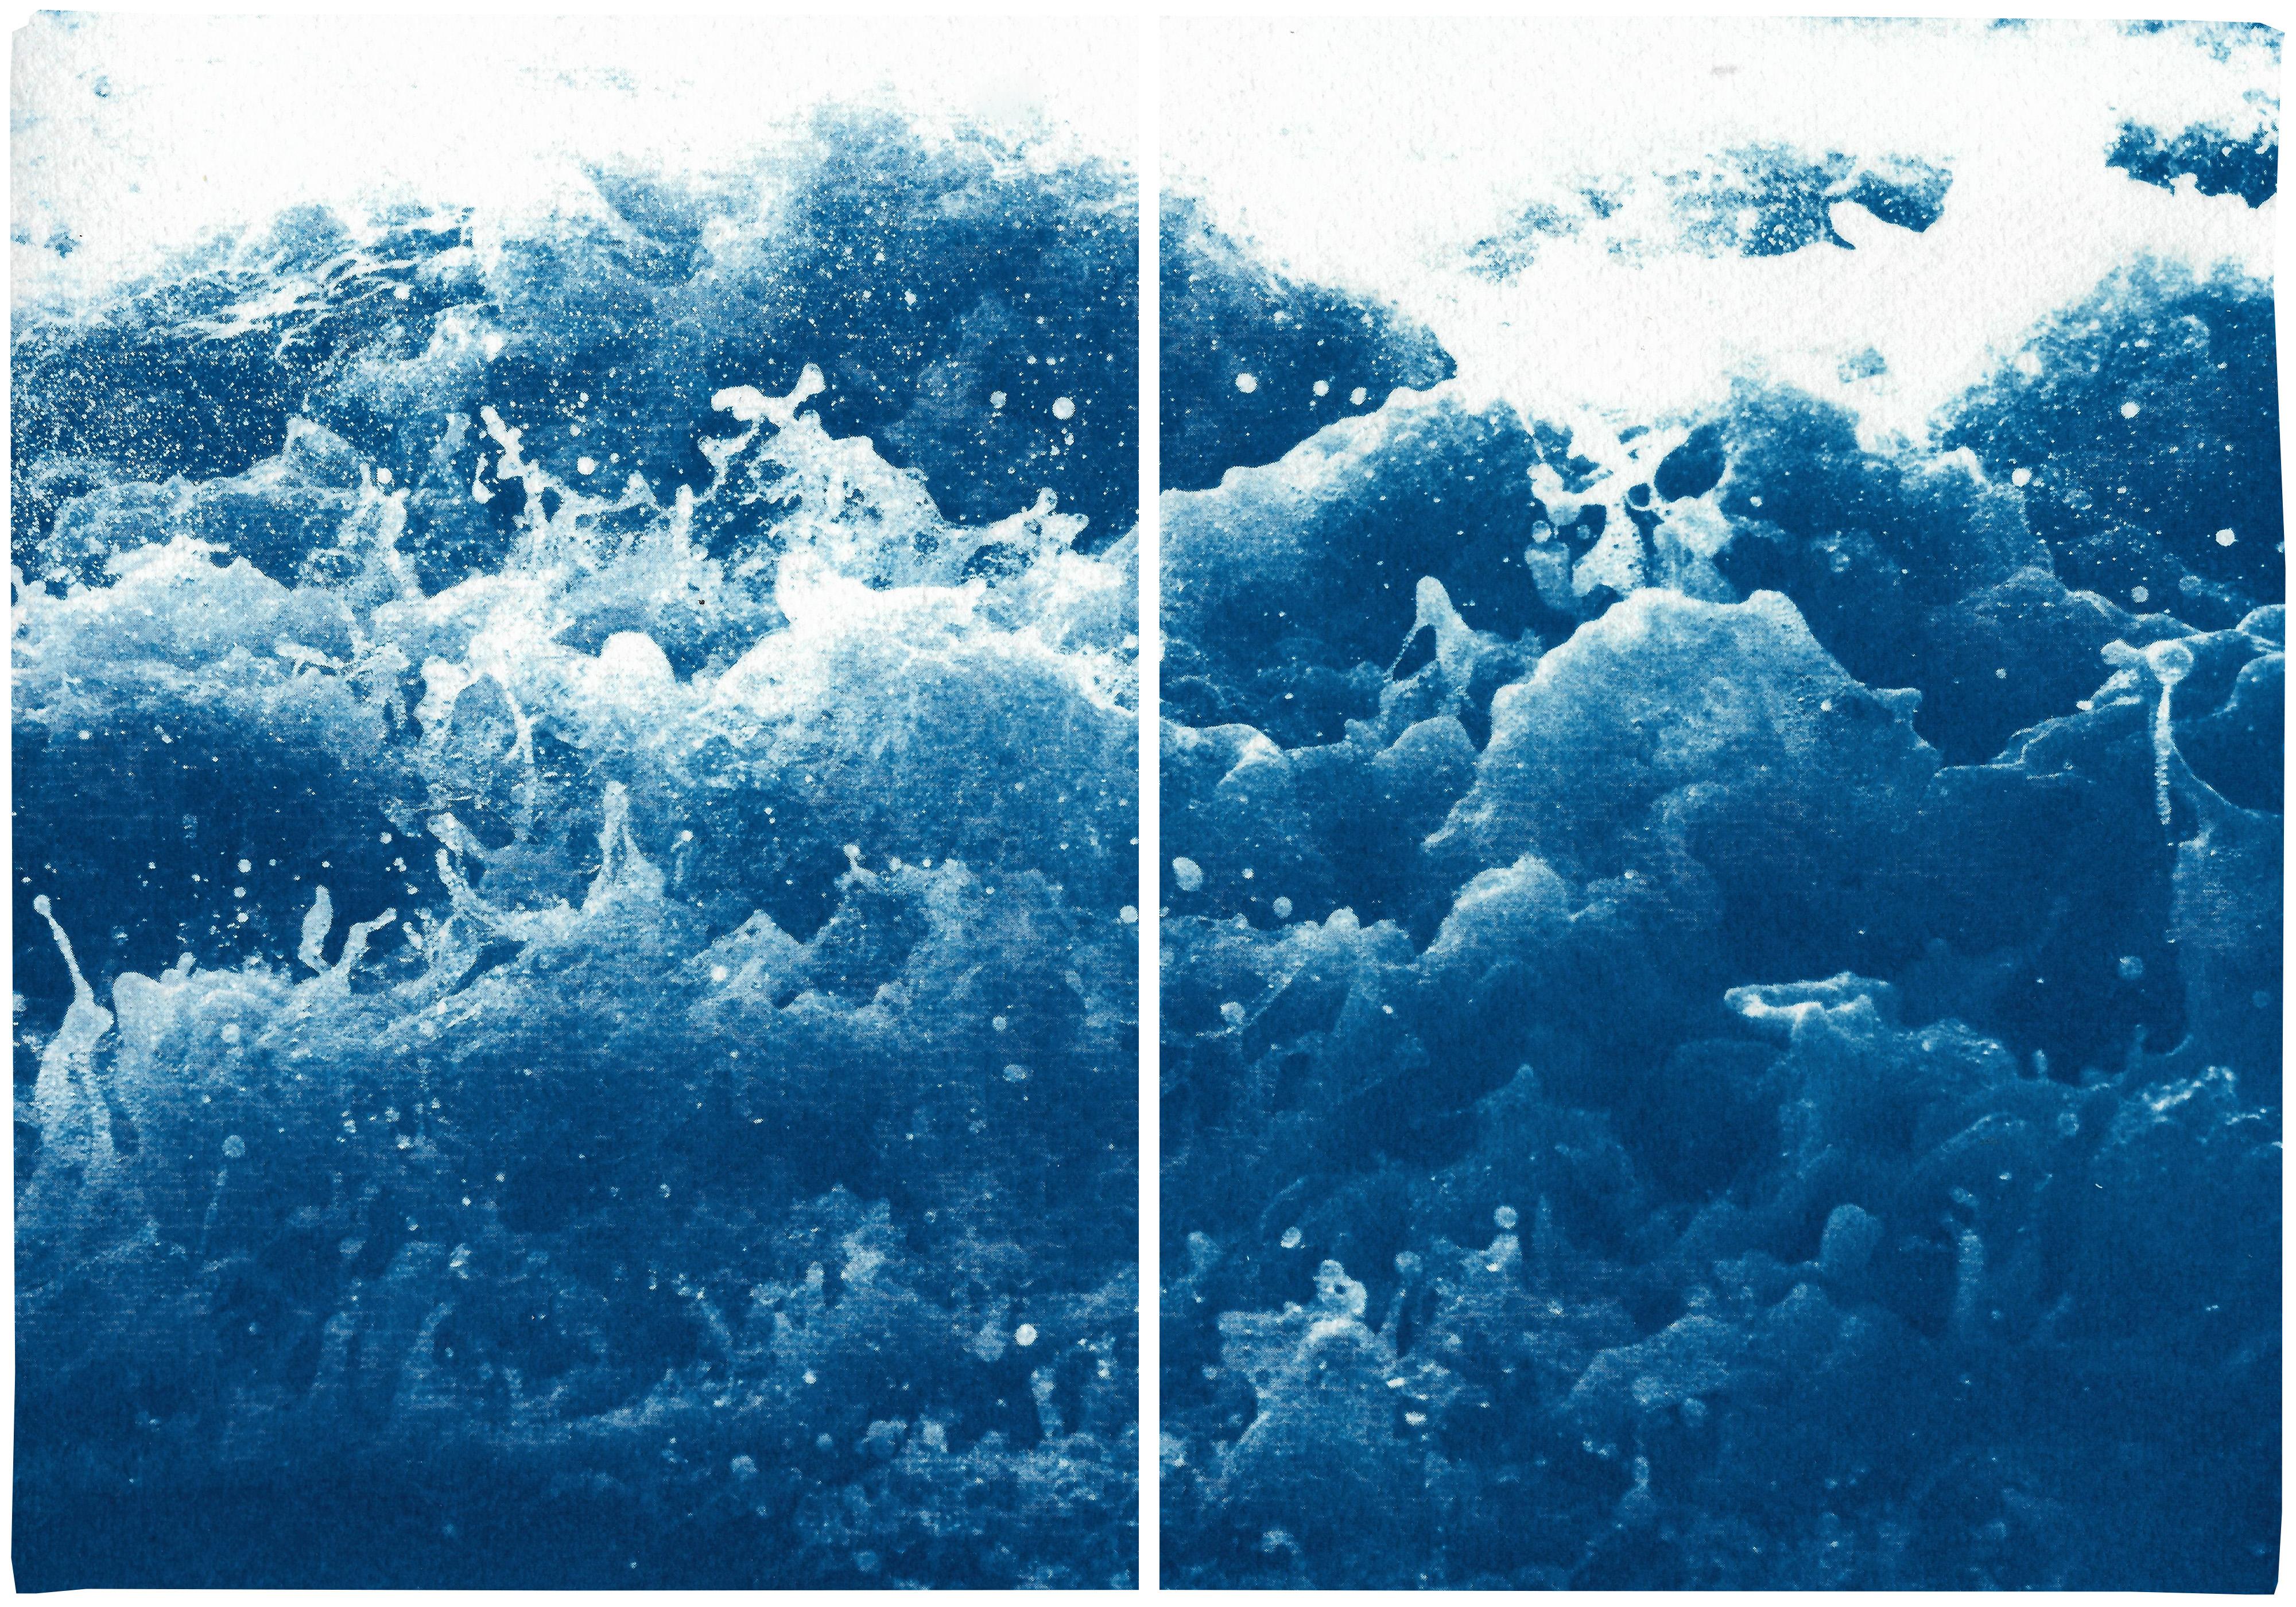 Kind of Cyan Landscape Print - Tempestuous Tidal in Blue, Stormy Seascape Diptych, Cyanotype Print, Maker, Blue